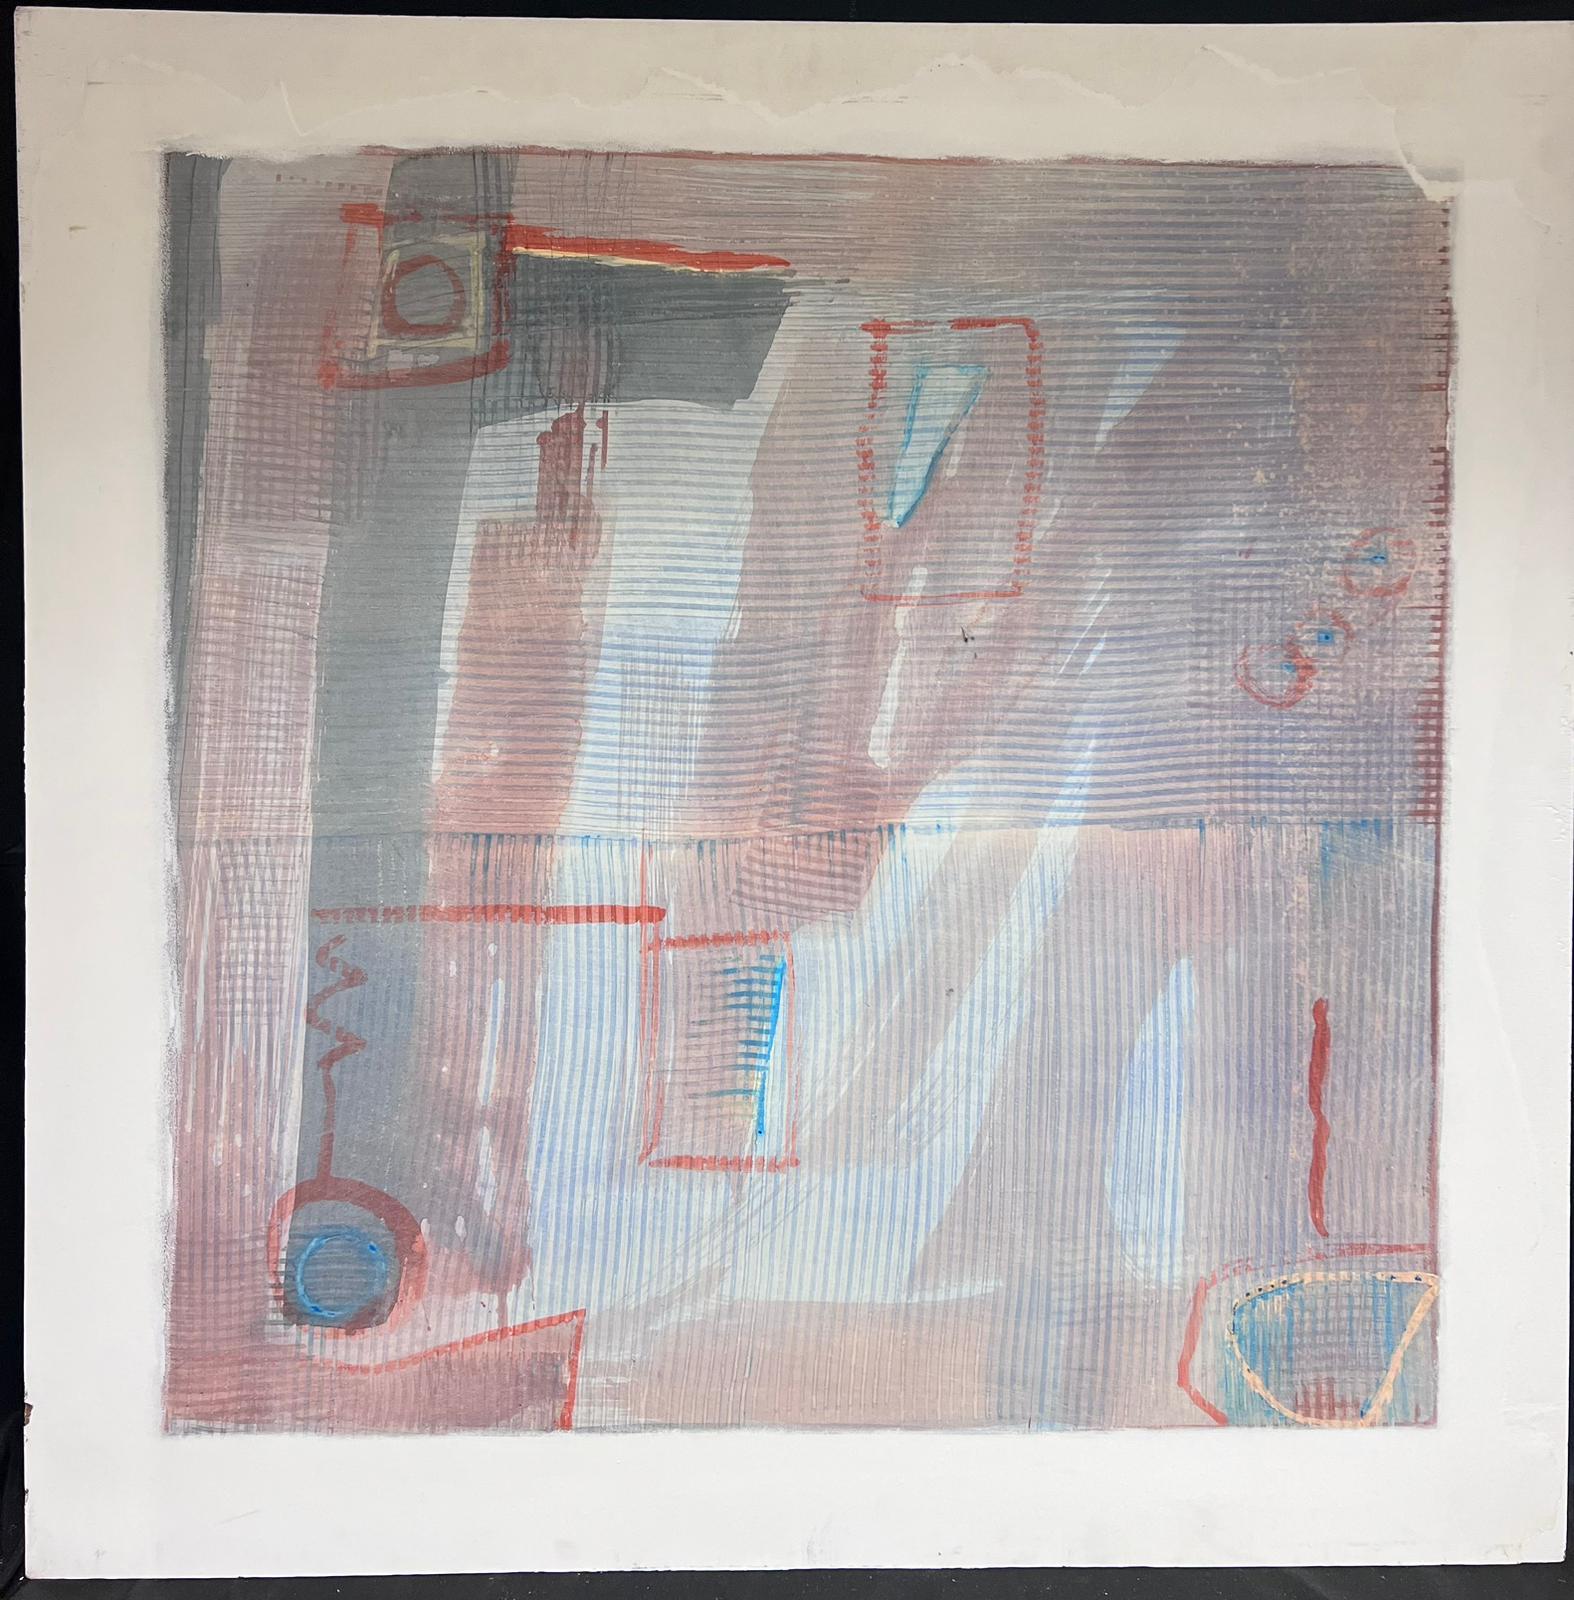 Abstract Expressionist Composition
by Jacques COULAIS (1955-2011)
oil painting on board
unframed: 44.5 x 44.5 inches
condition: very good
provenance: all the paintings we have for sale by this artist have come from the artists studio and are all